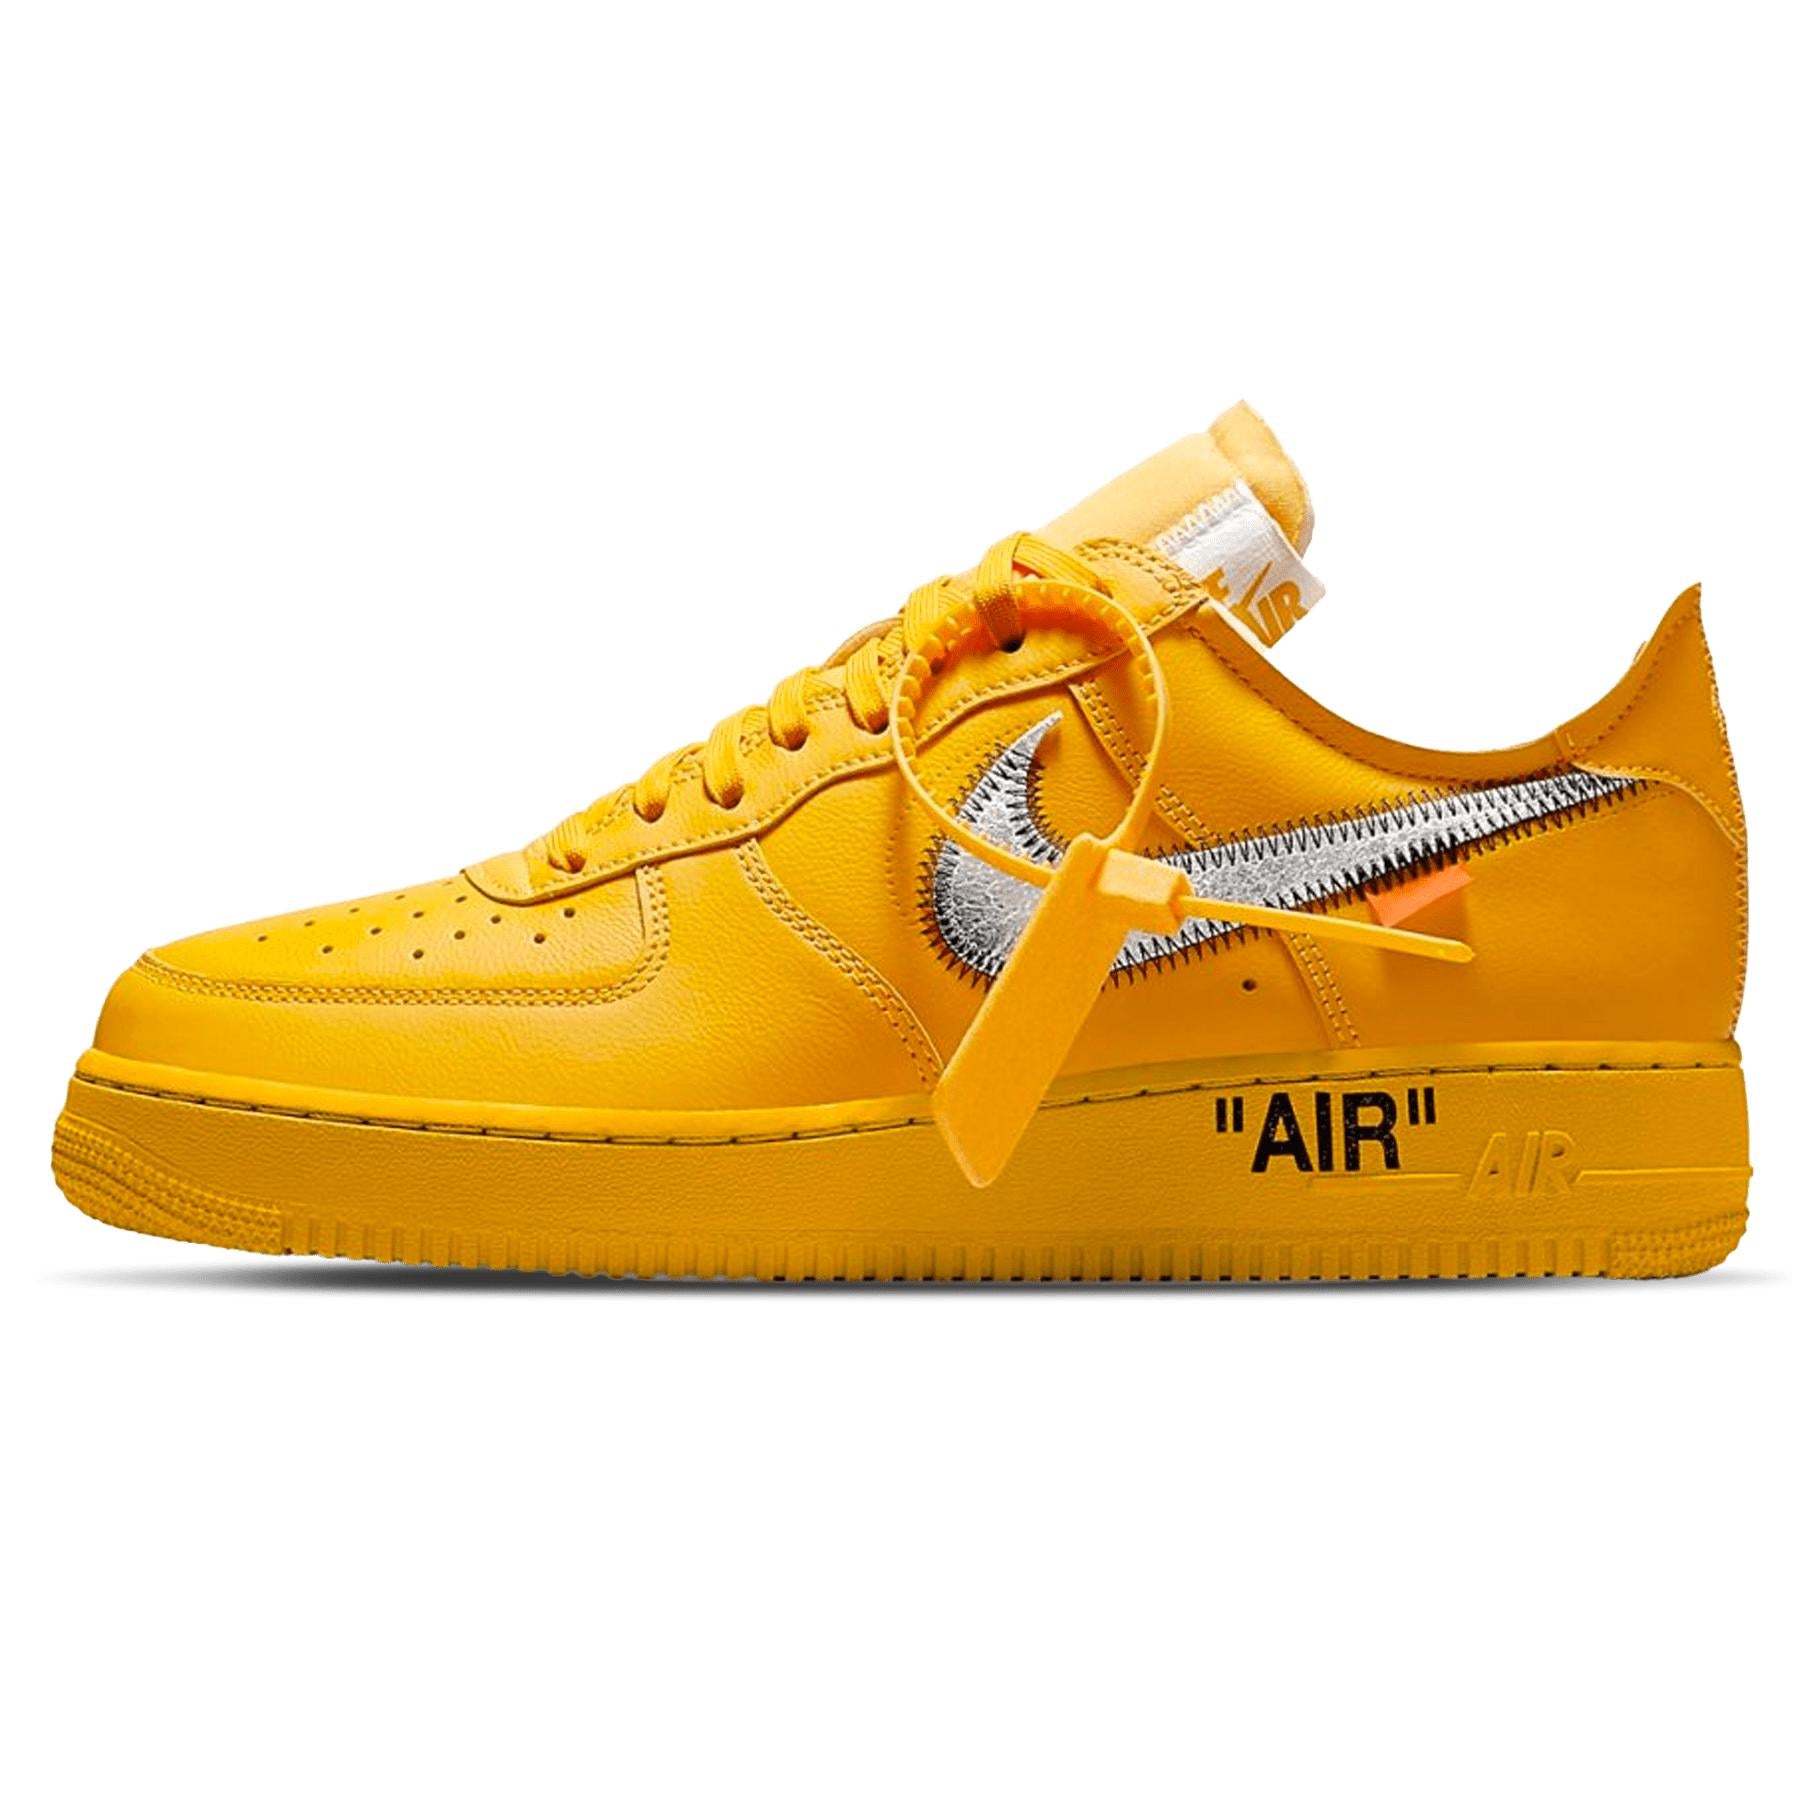 New Look At The Off-White x Nike Air Force 1 University Gold